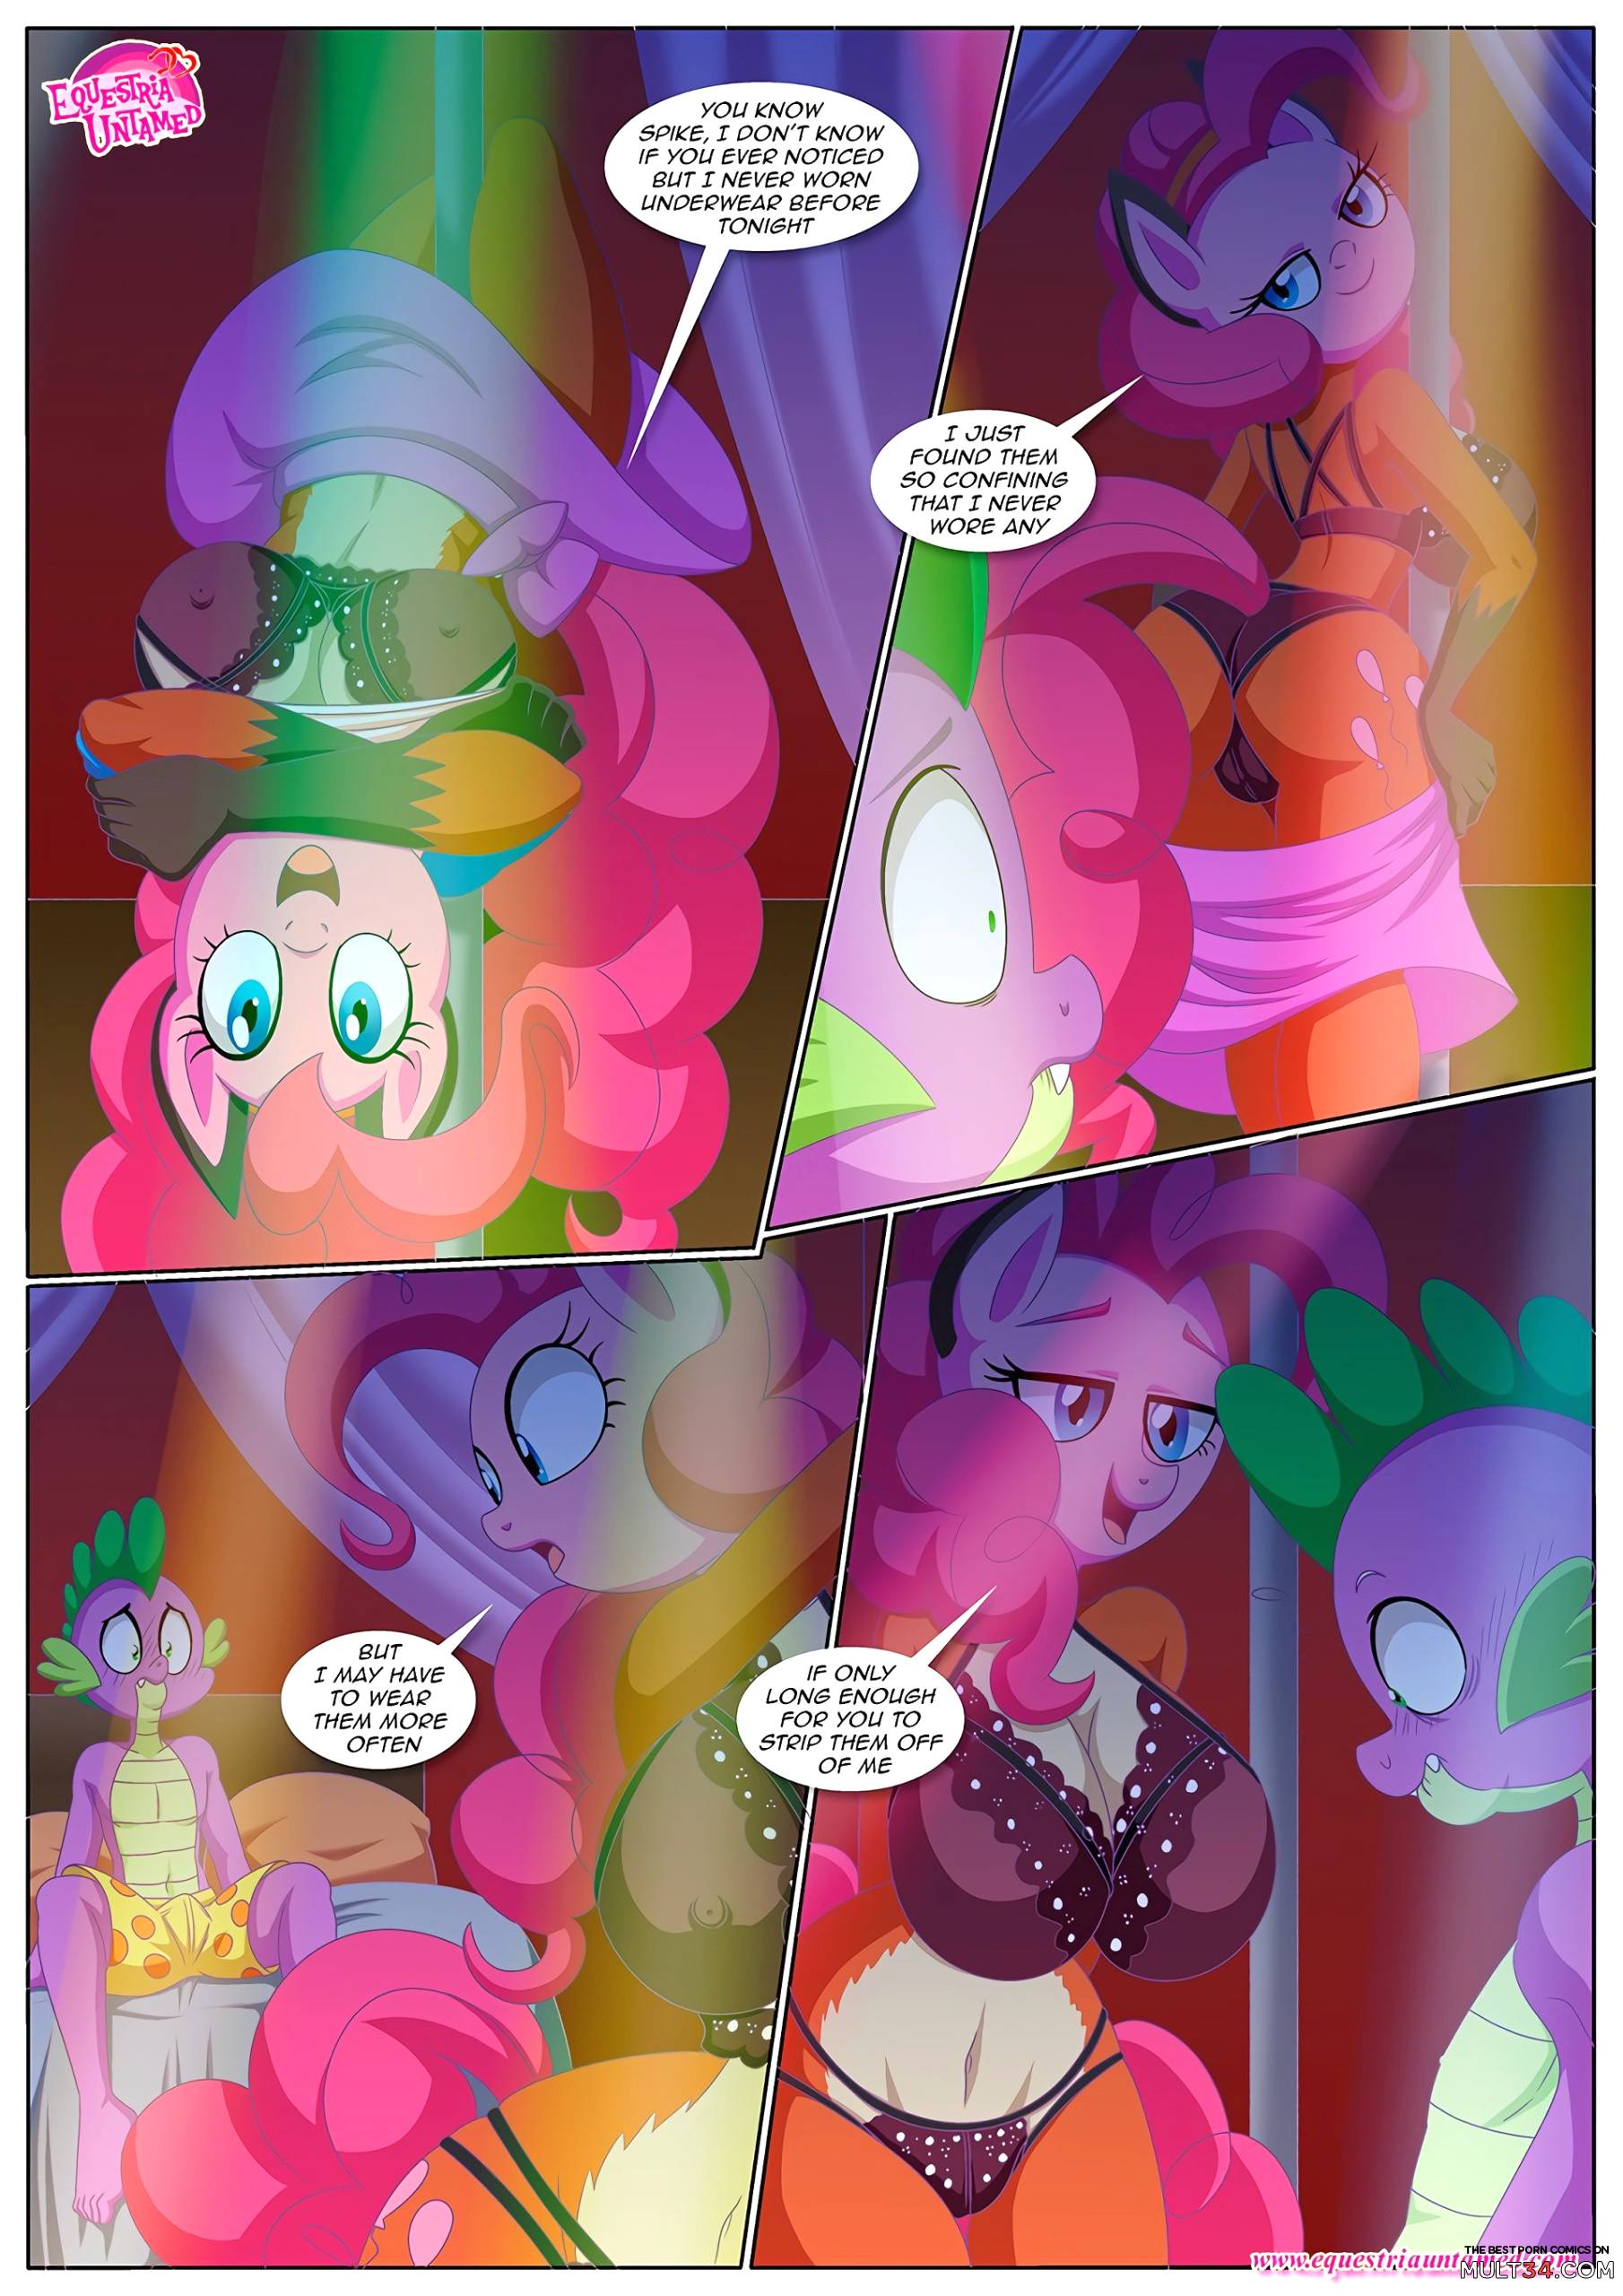 Power of Dragon Mating - Chapter 2 page 29